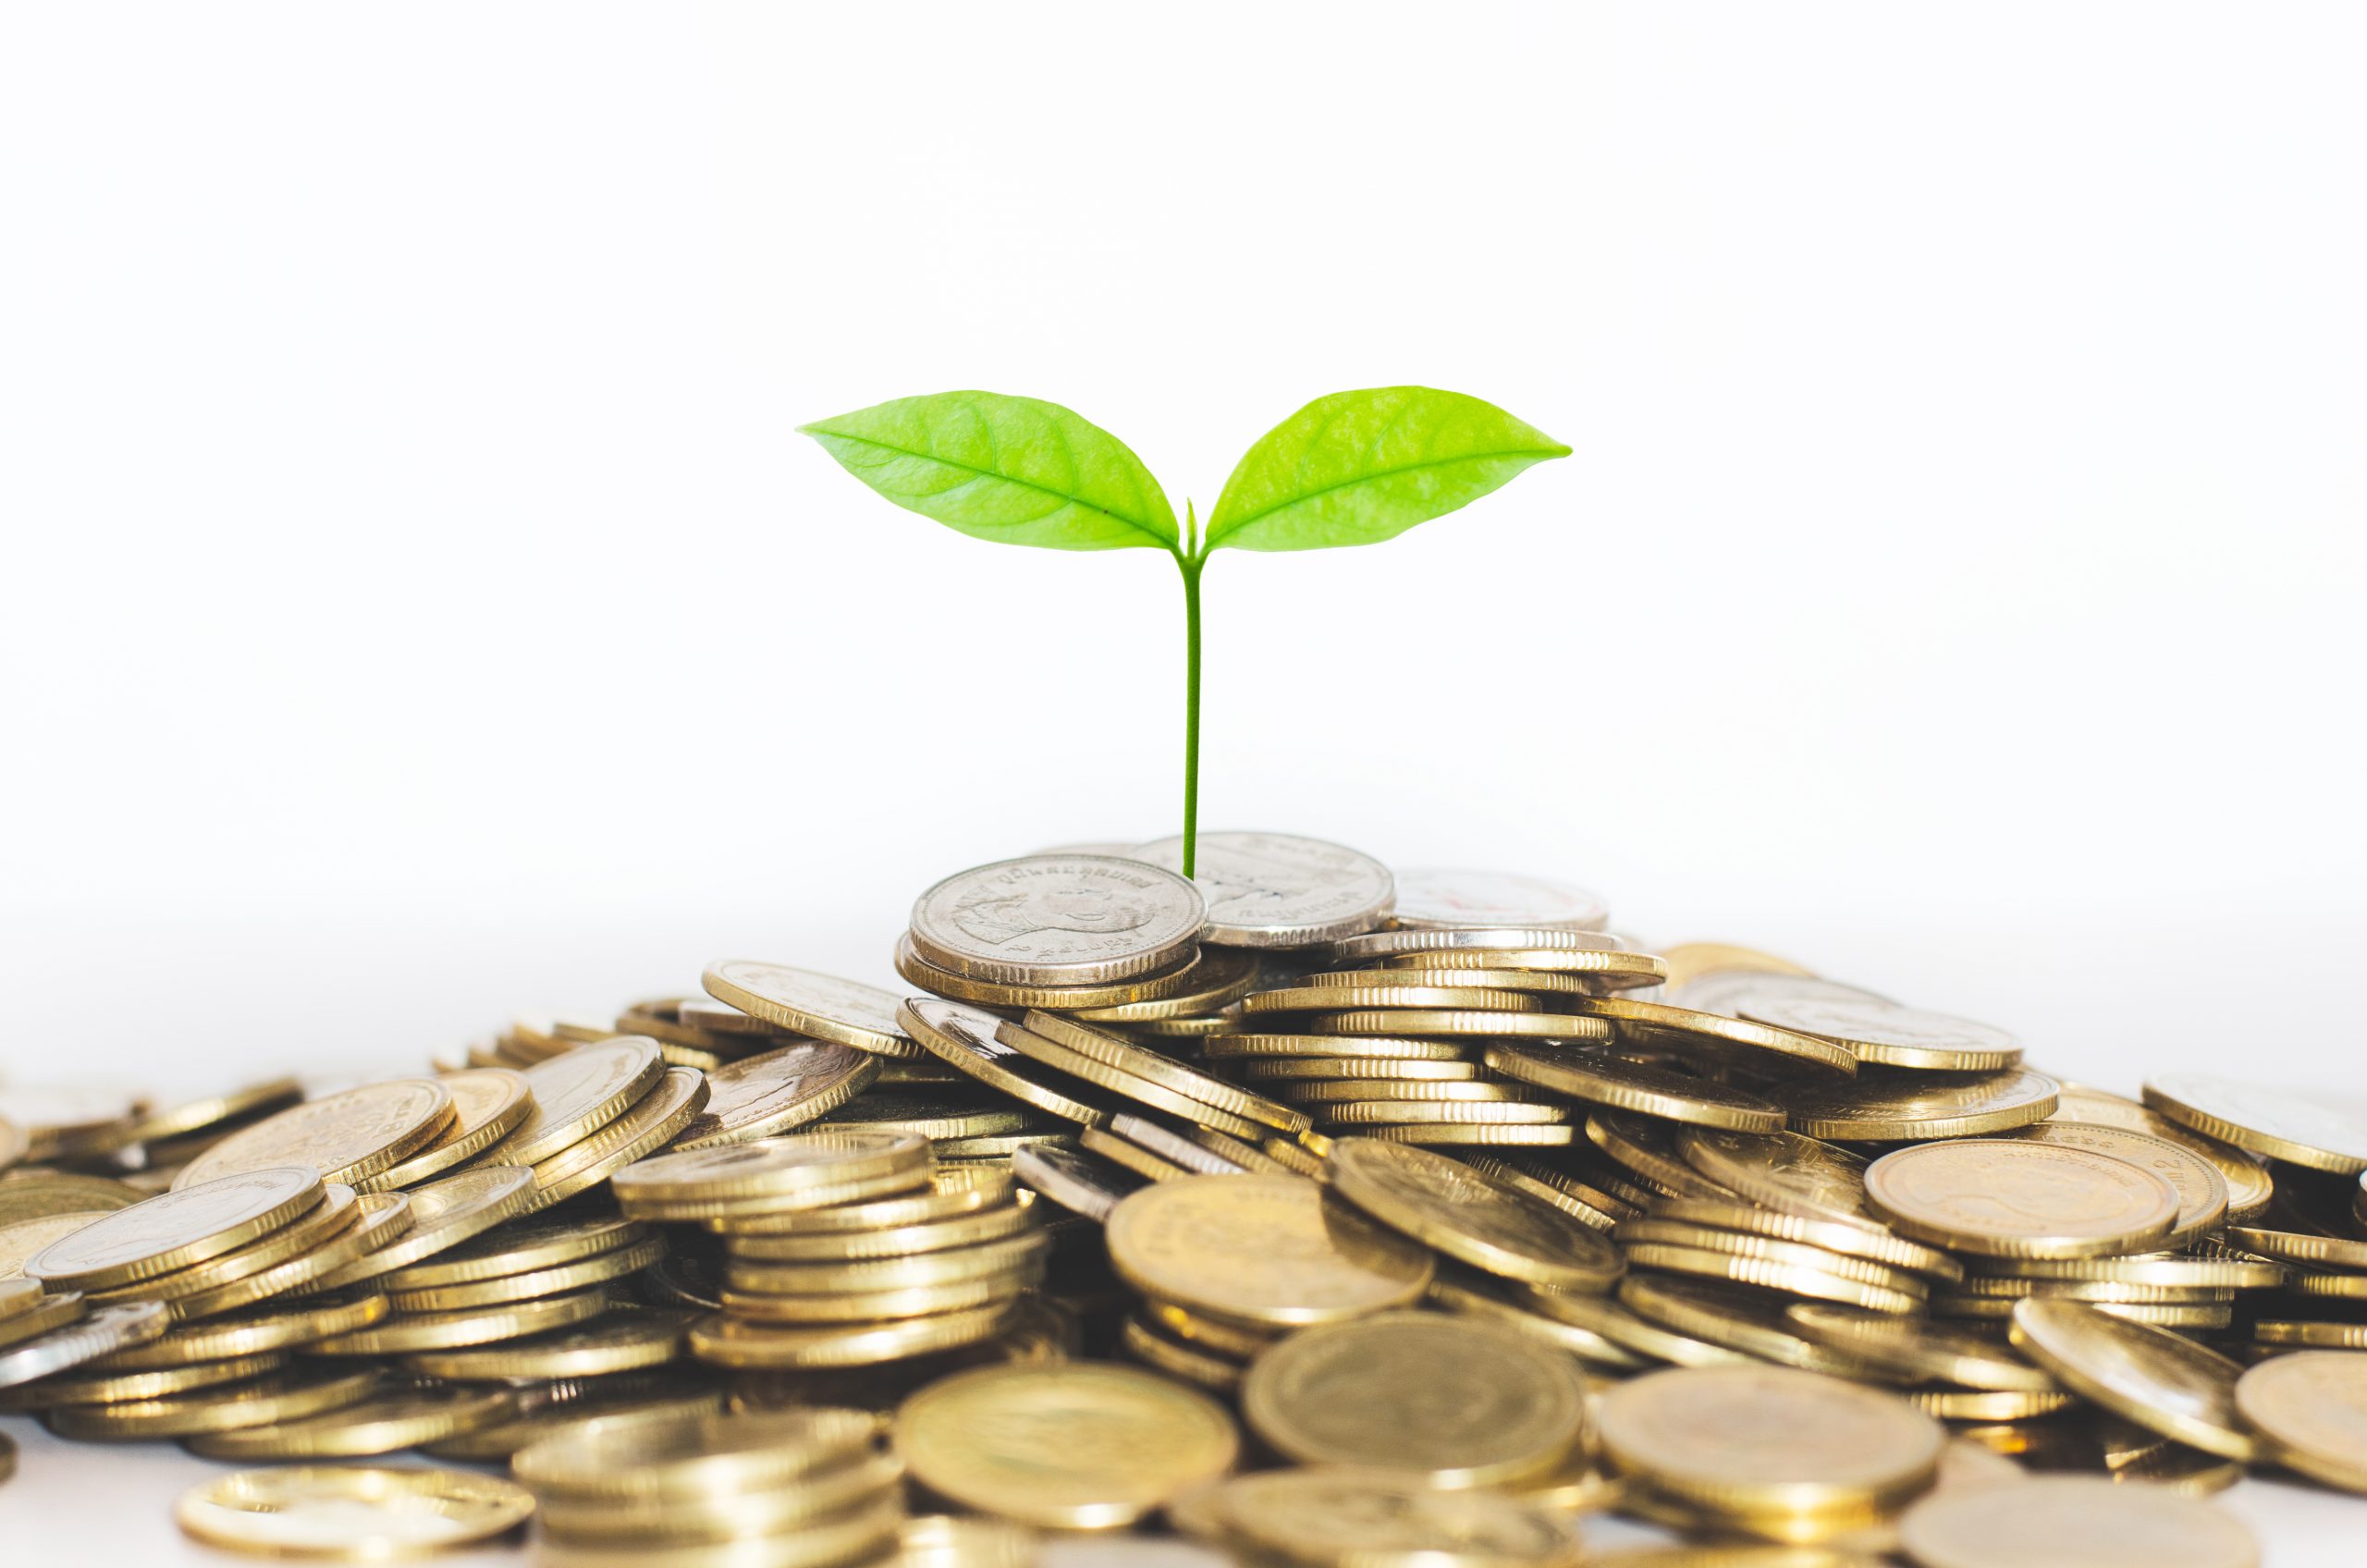 green-seed-growth-on-coins-stack-with-white-background-money-saving-business-investment-successful-growing-concept